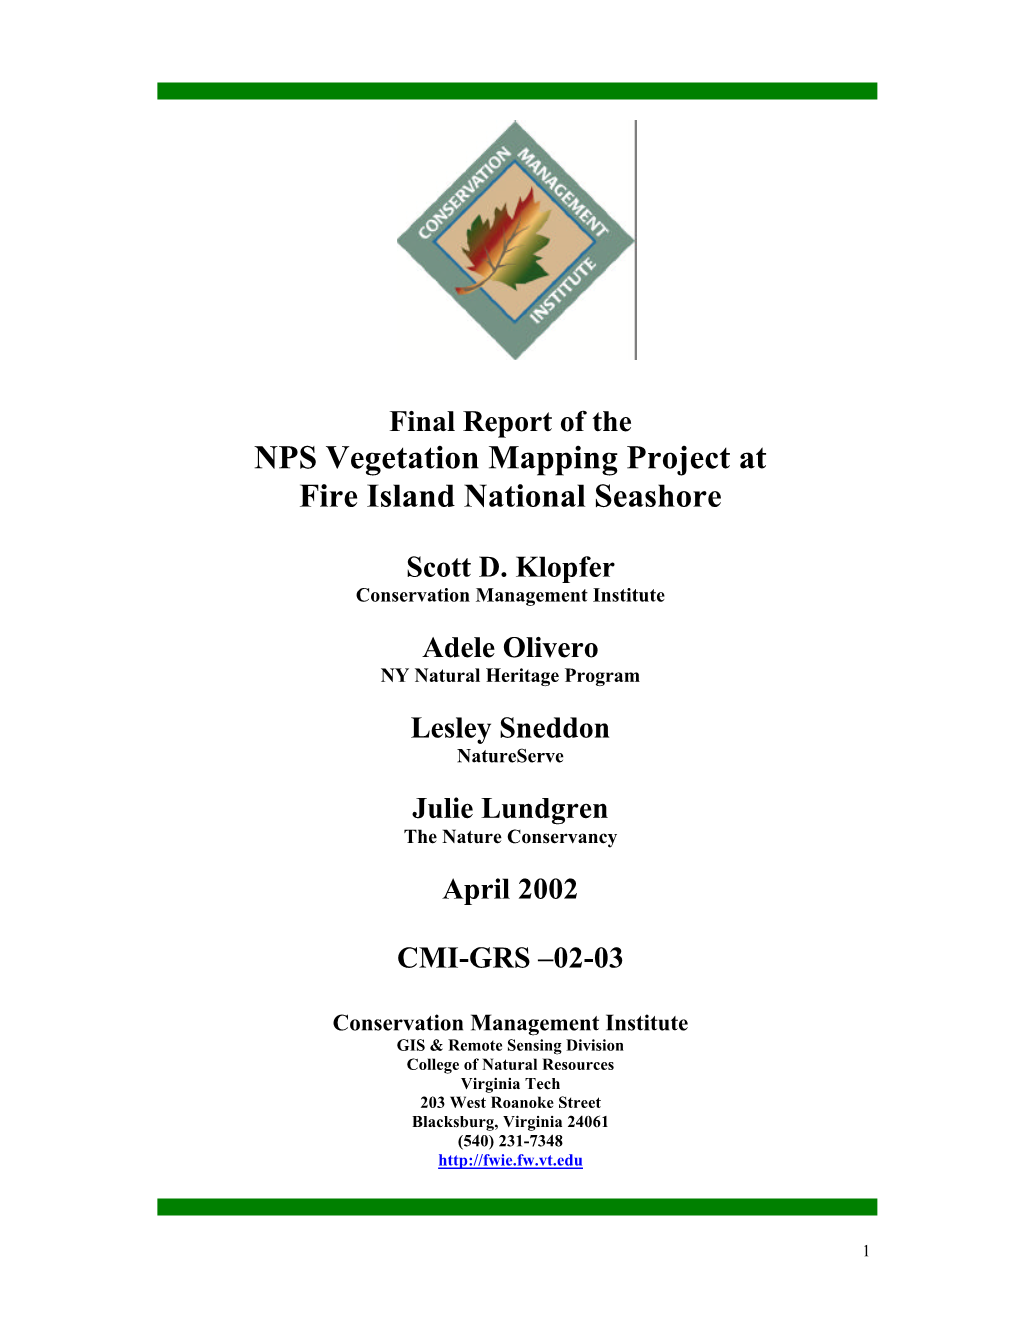 NPS Vegetation Mapping Project at Fire Island National Seashore